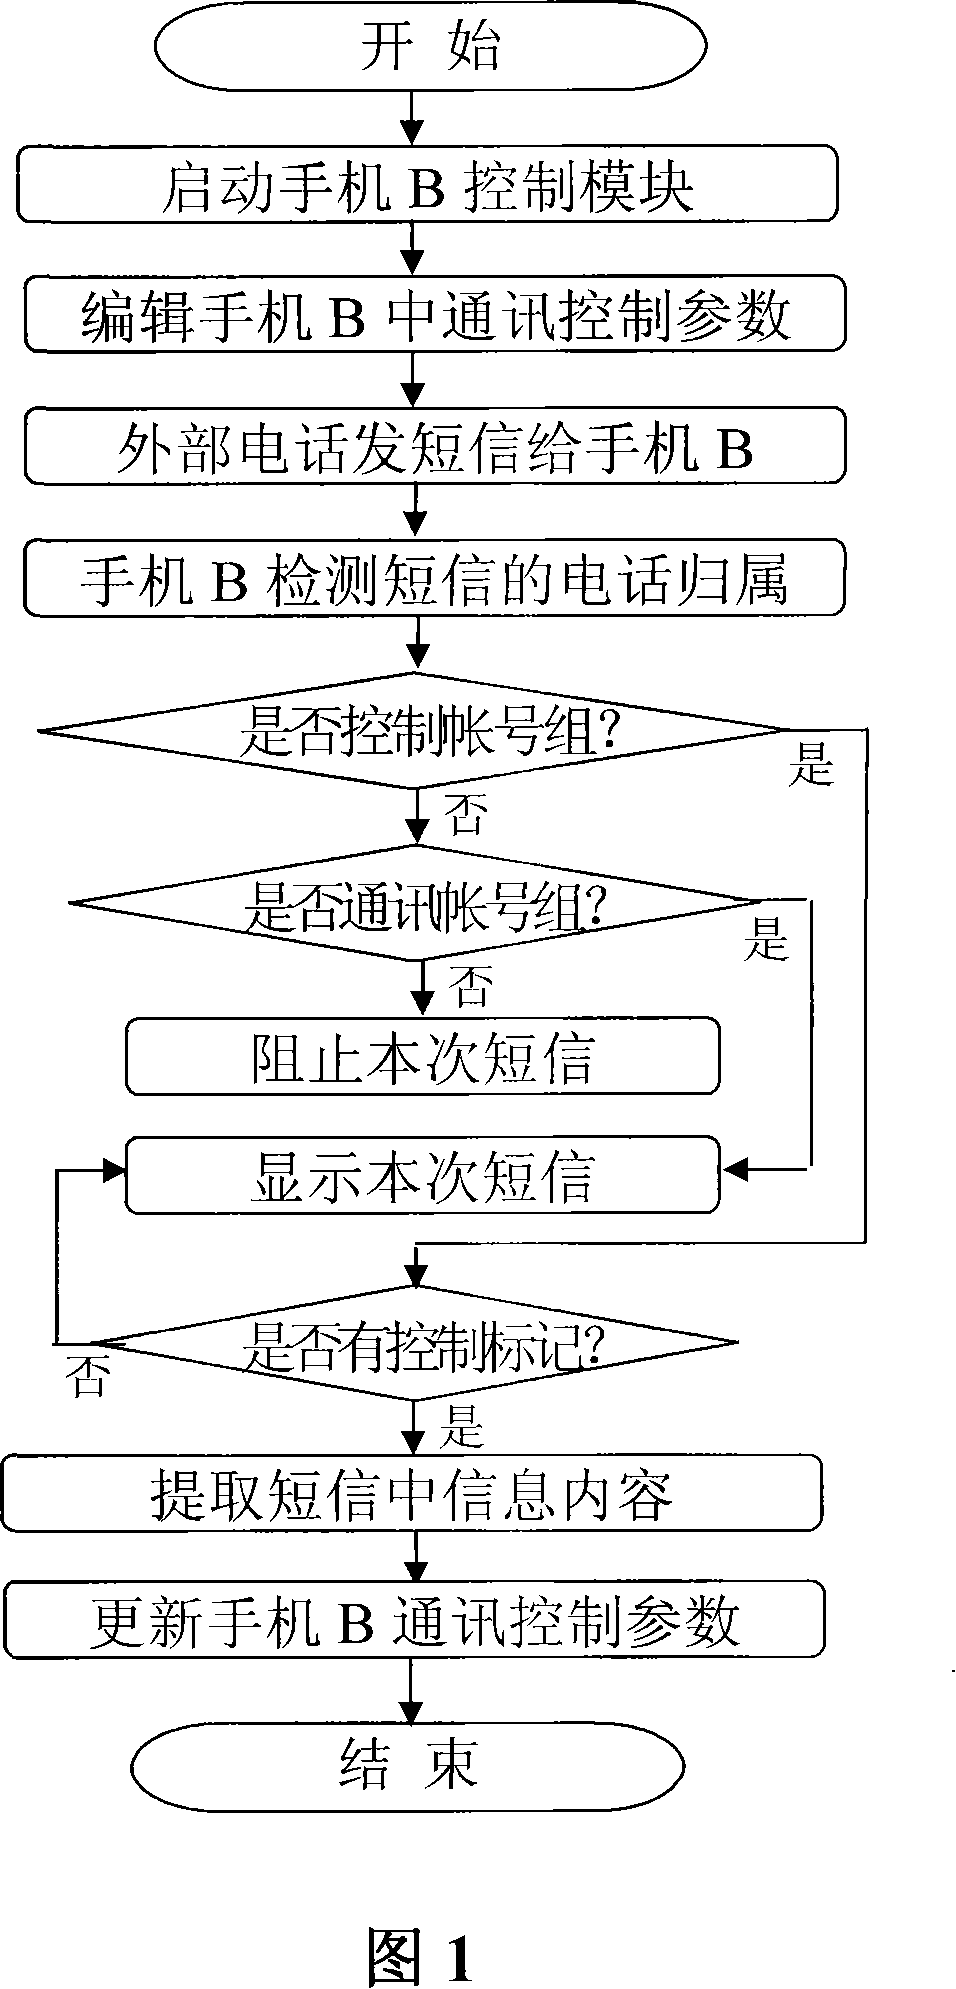 Control method of handset used for minors